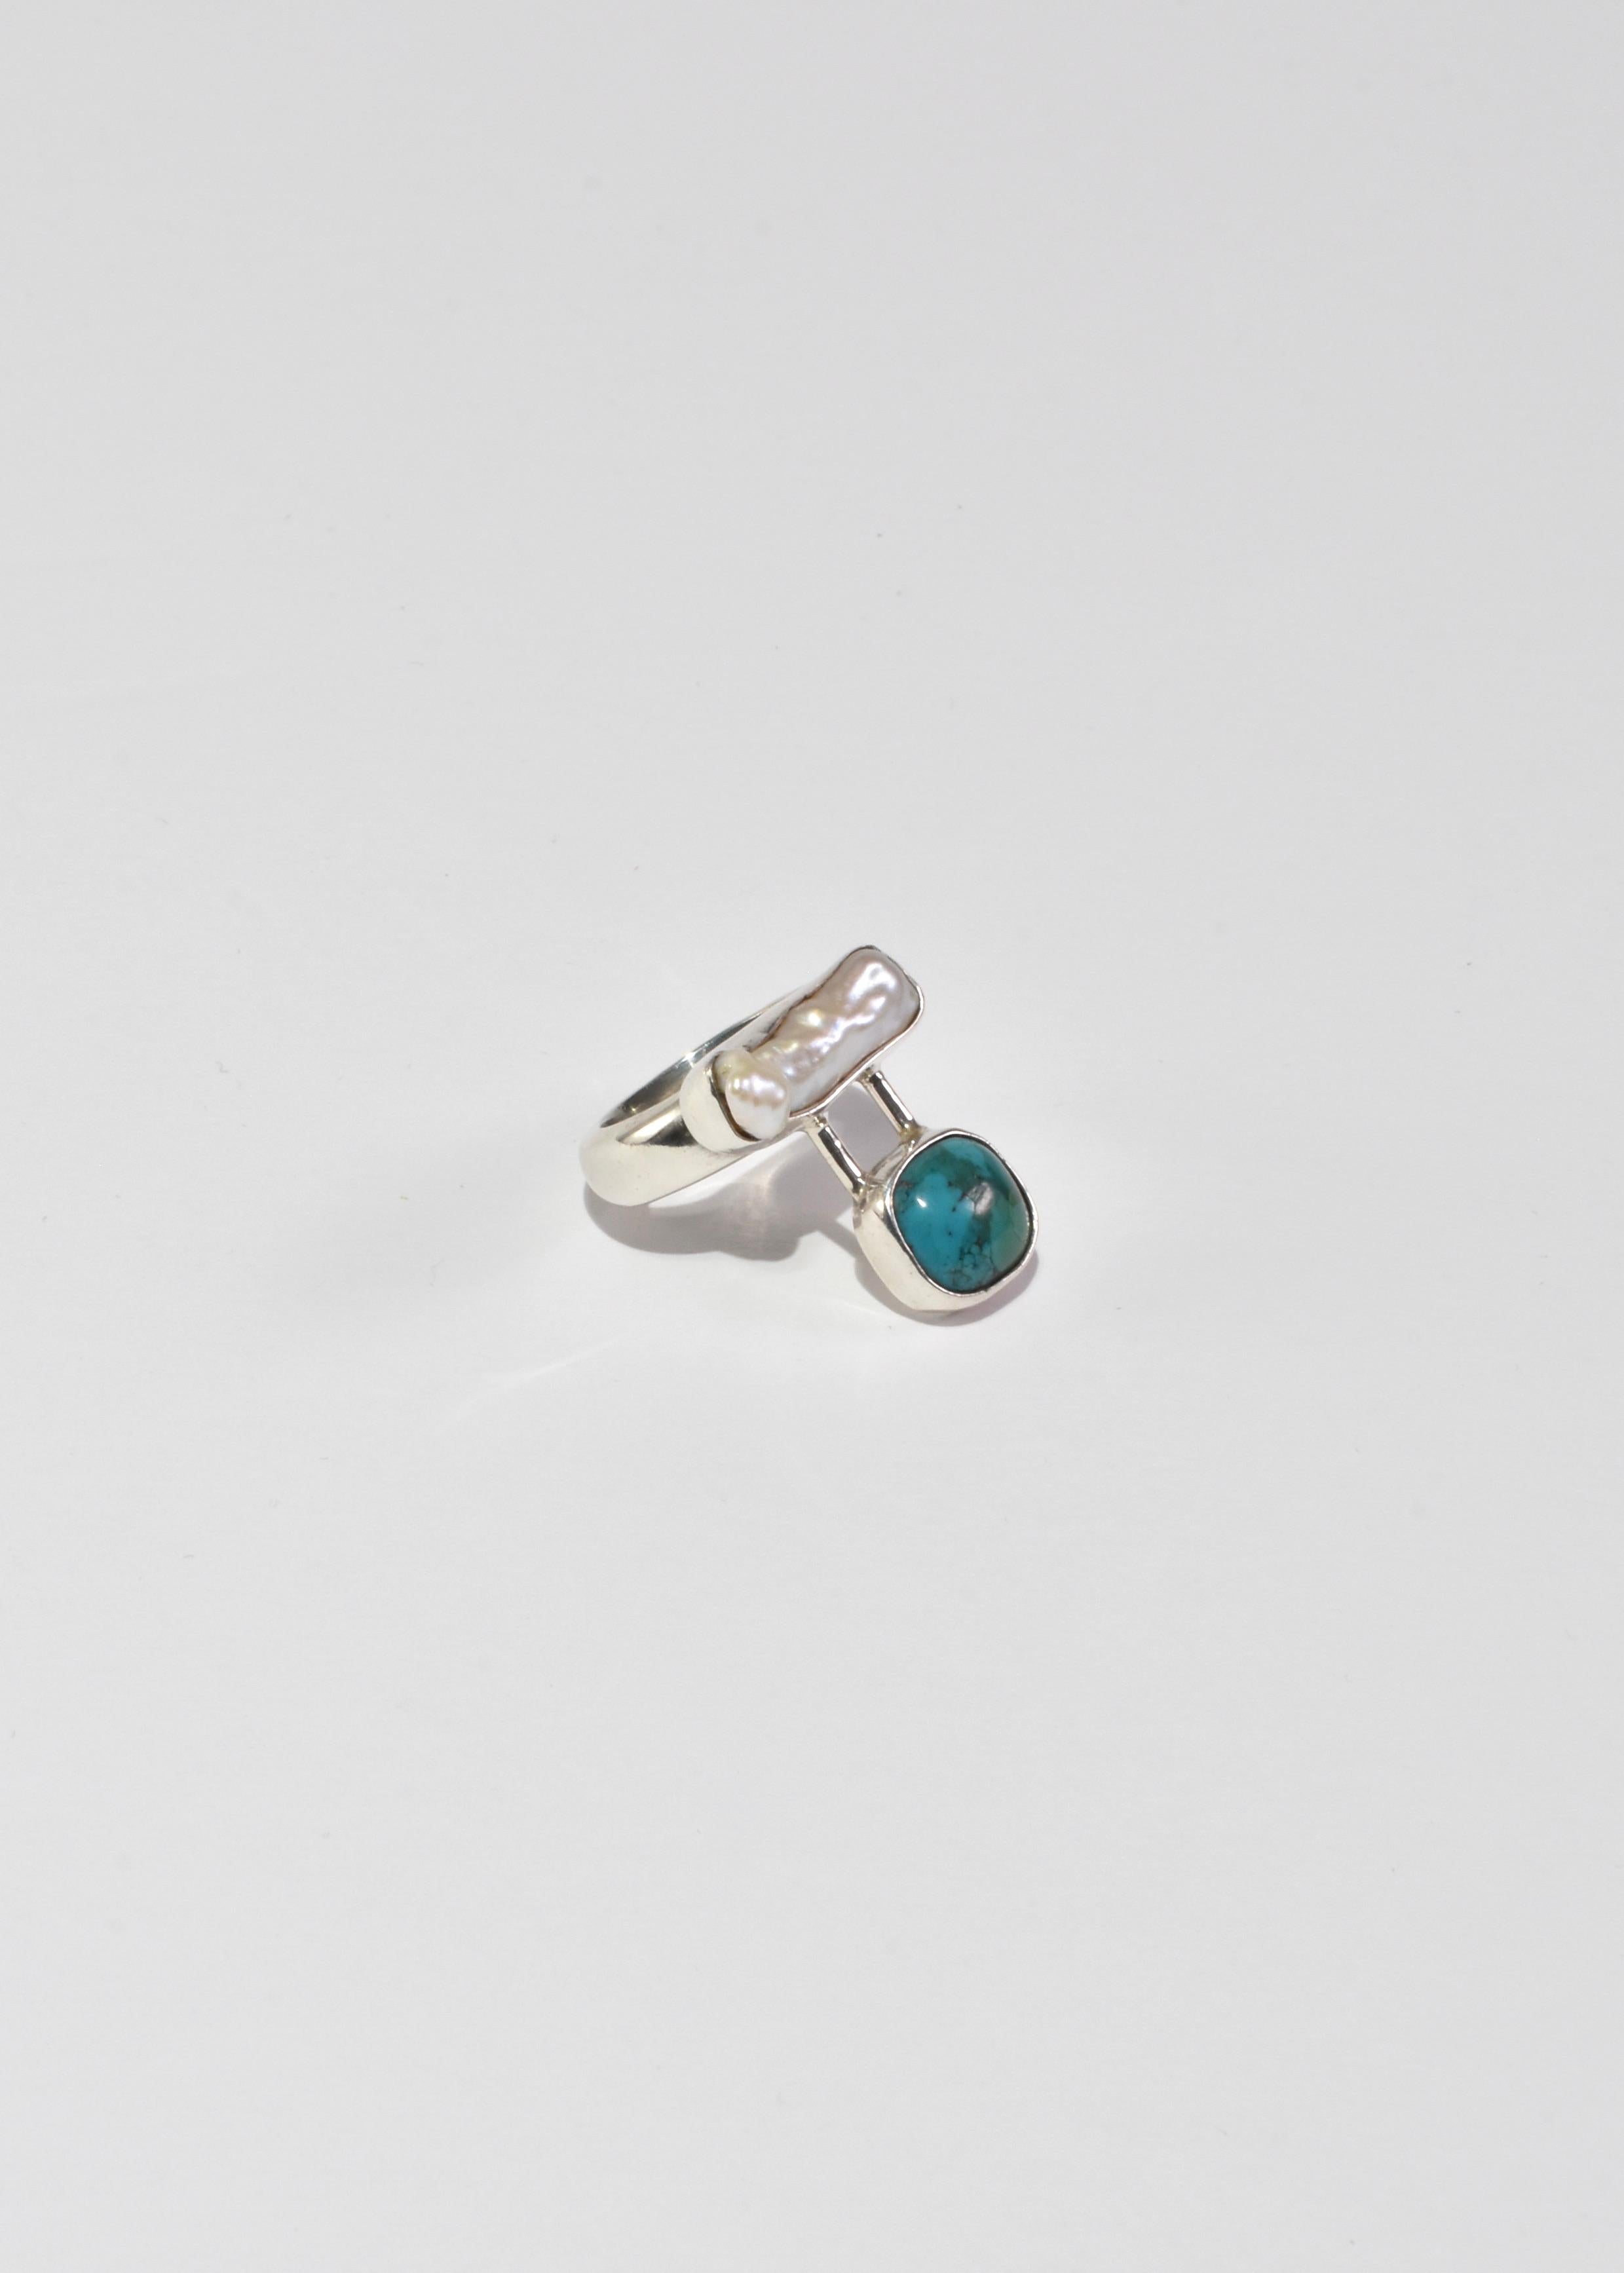 Modernist Pearl Turquoise Ring For Sale